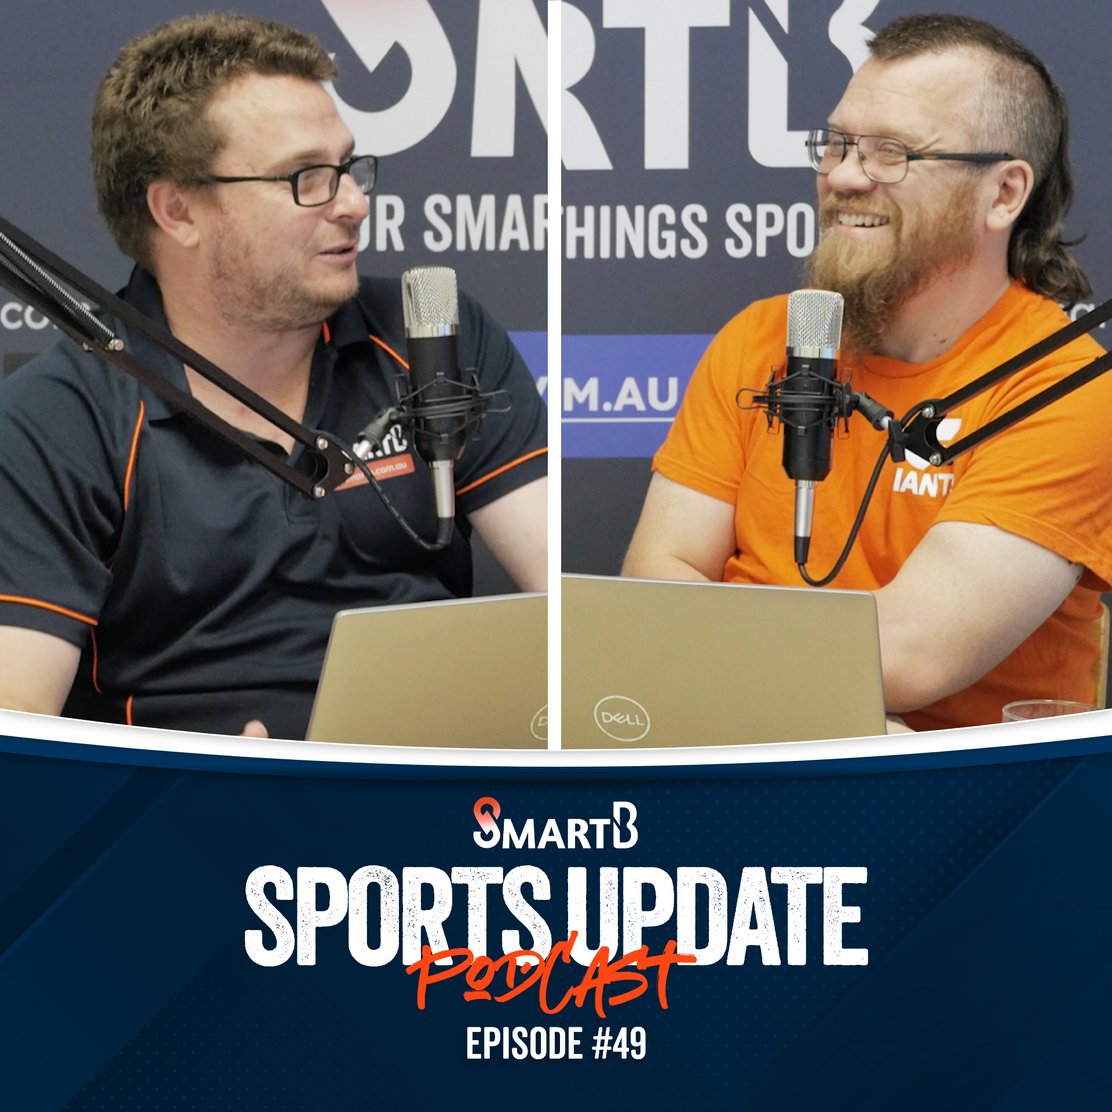 🔊🔥 NEW PODCAST ALERT: SmartB Sports Talk - Episode 49
 
#SmartBSportsTalk #PodcastLife #SportsTalk #NRL #Cricket #AFL #CombatSports #T20Finals #RugbyLeague #PodcastLife #LatestEpisode #SportsPredictions #GameDay #AthleteNews #SportsFanatics #ListenNow
 
Stay tuned with SmartB!